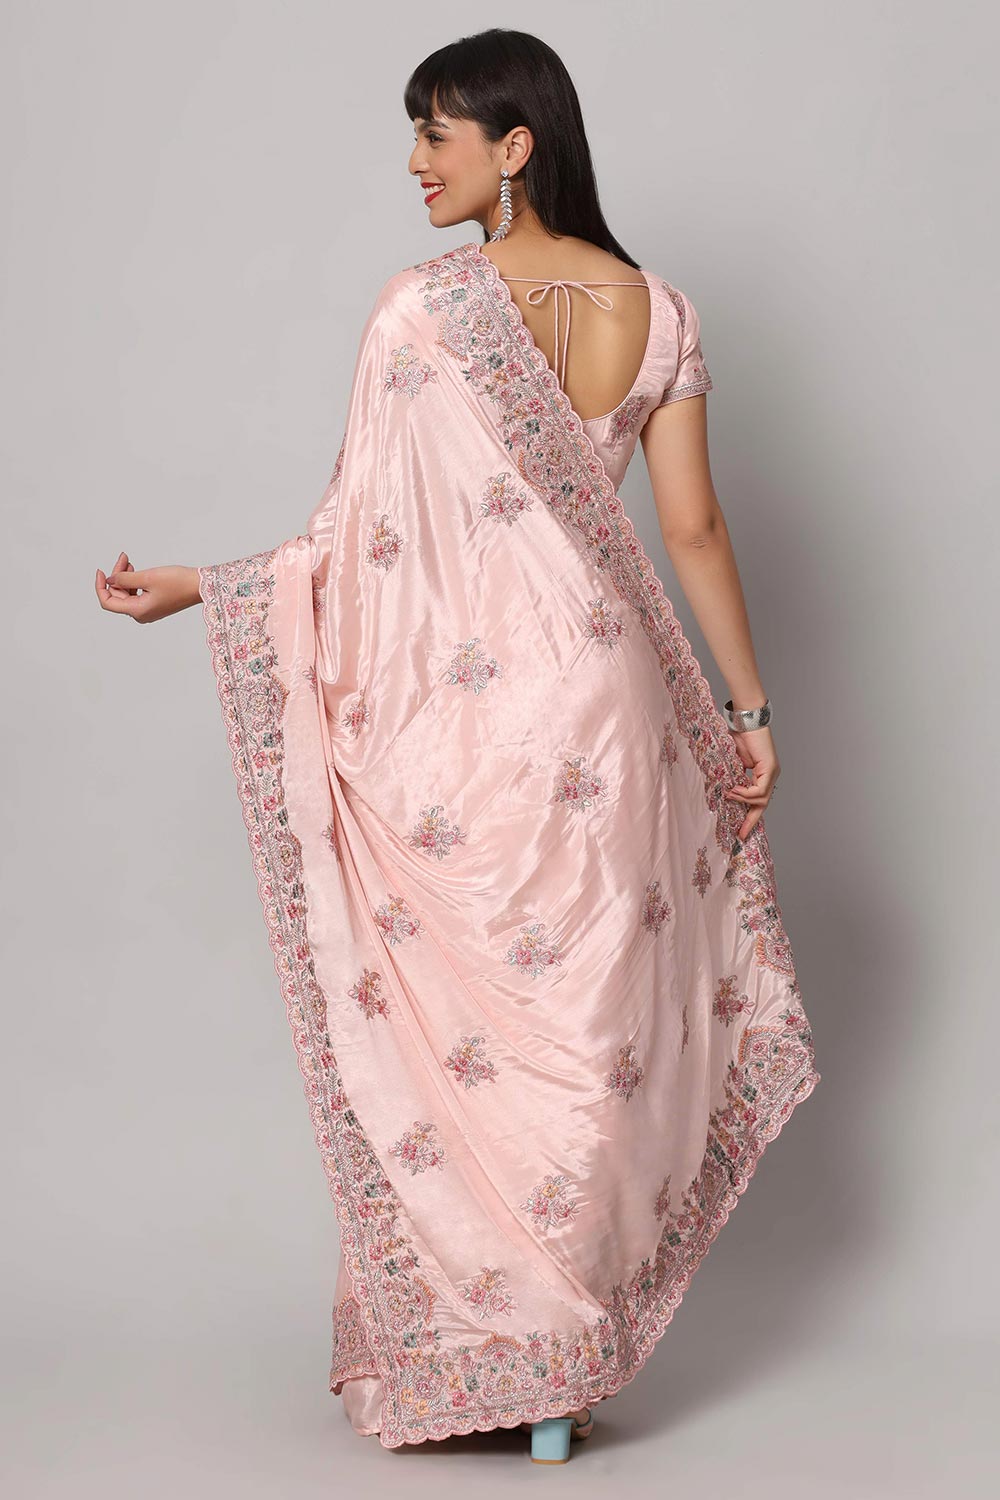 Shop Noor Pink Royal Embroidered Crepe One Minute Saree at best offer at our  Store - One Minute Saree